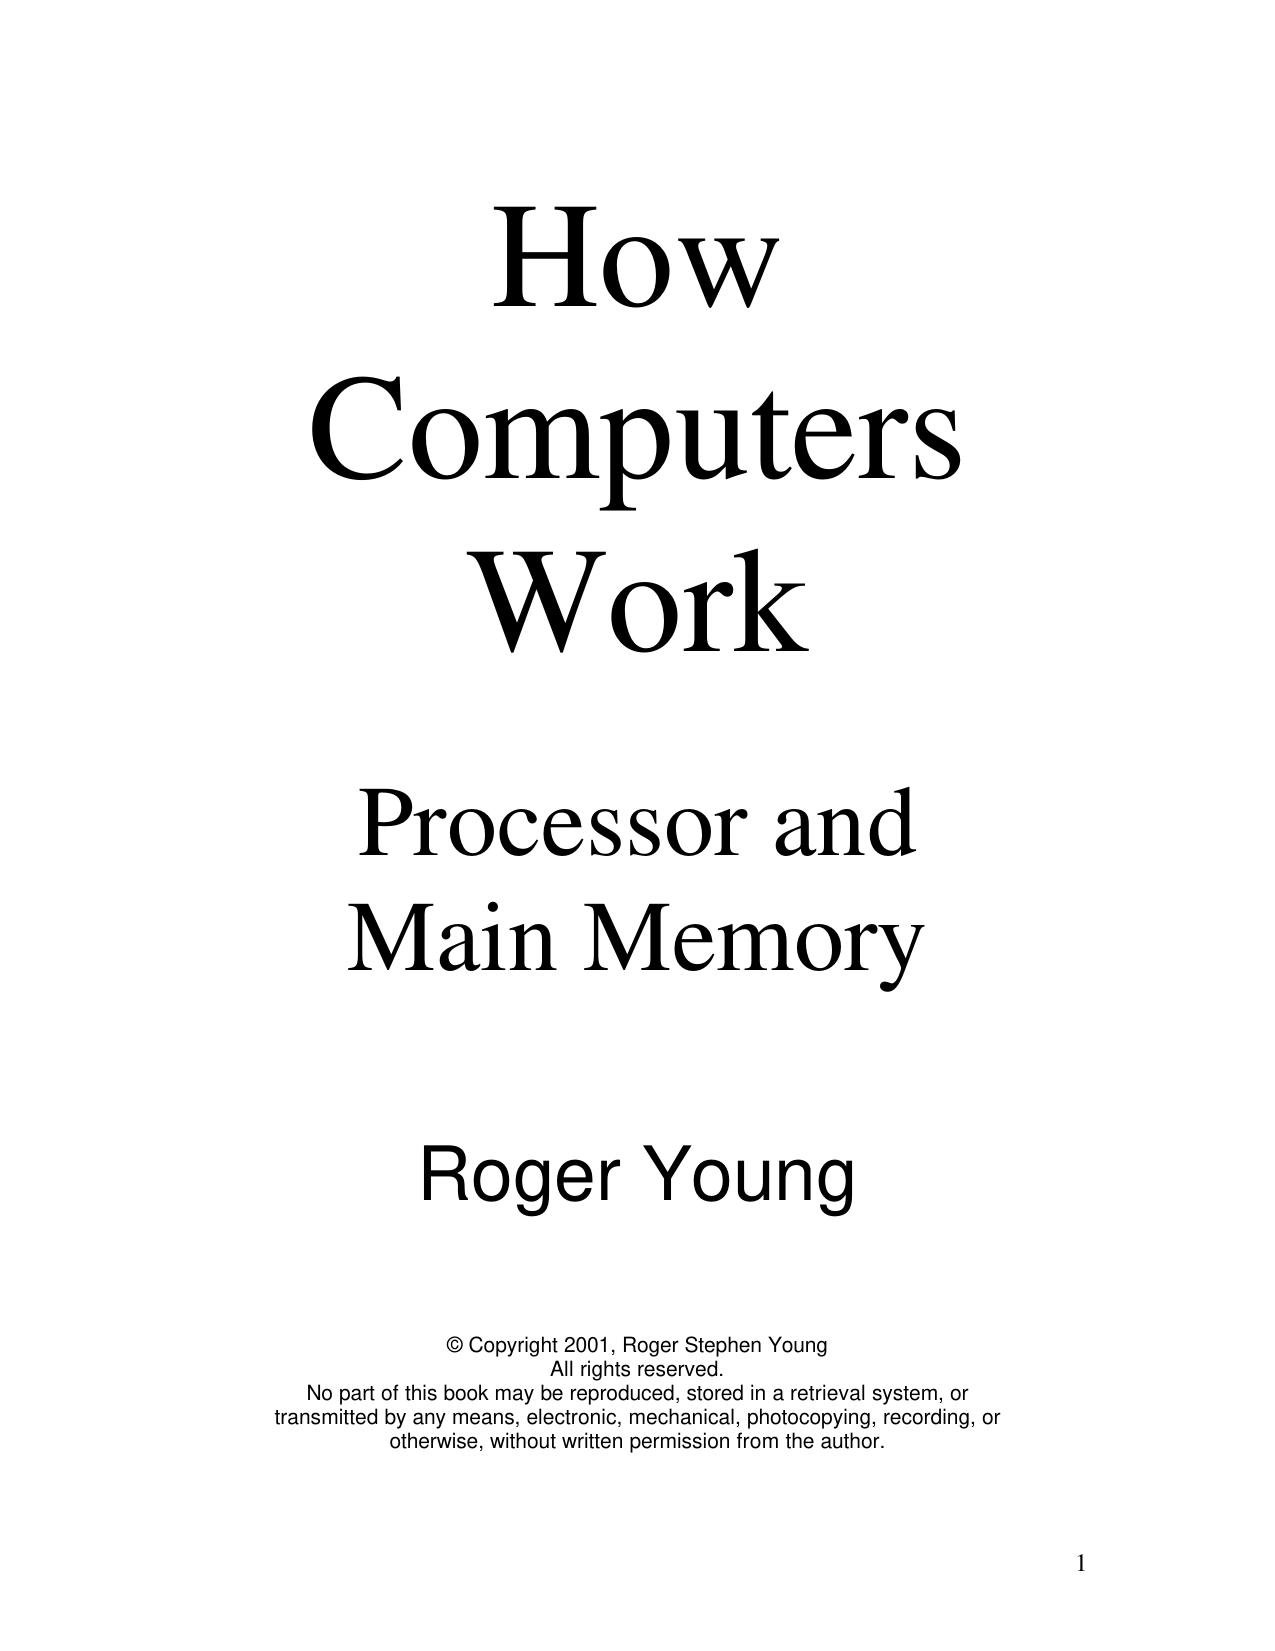 How Computers Work: Processor and Main Memory